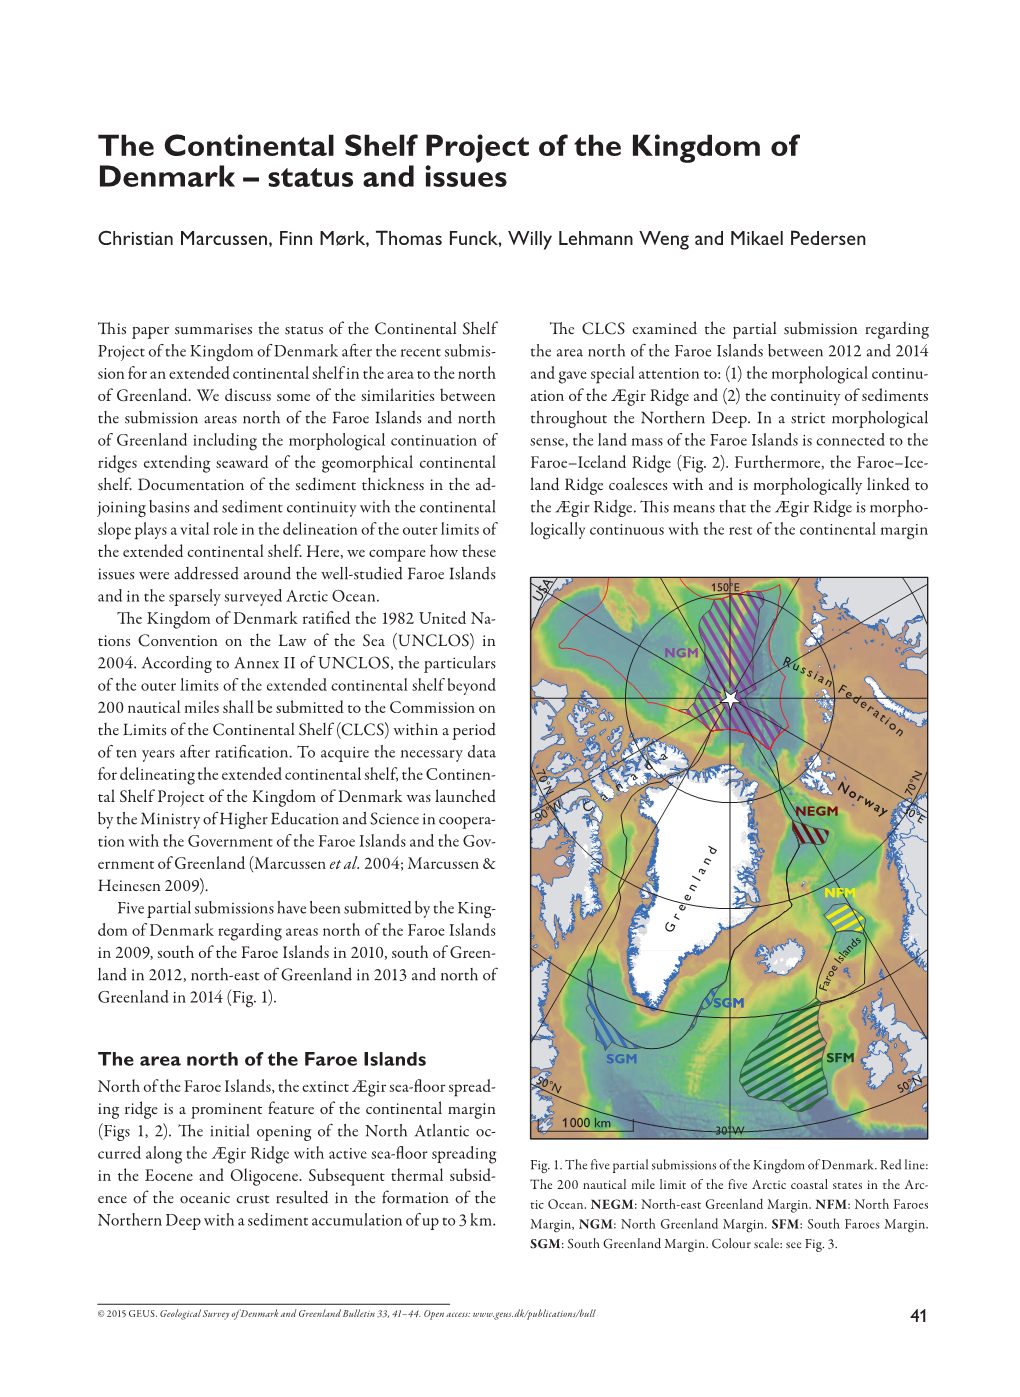 Geological Survey of Denmark and Greenland Bulletin 33, 2015, 41-44